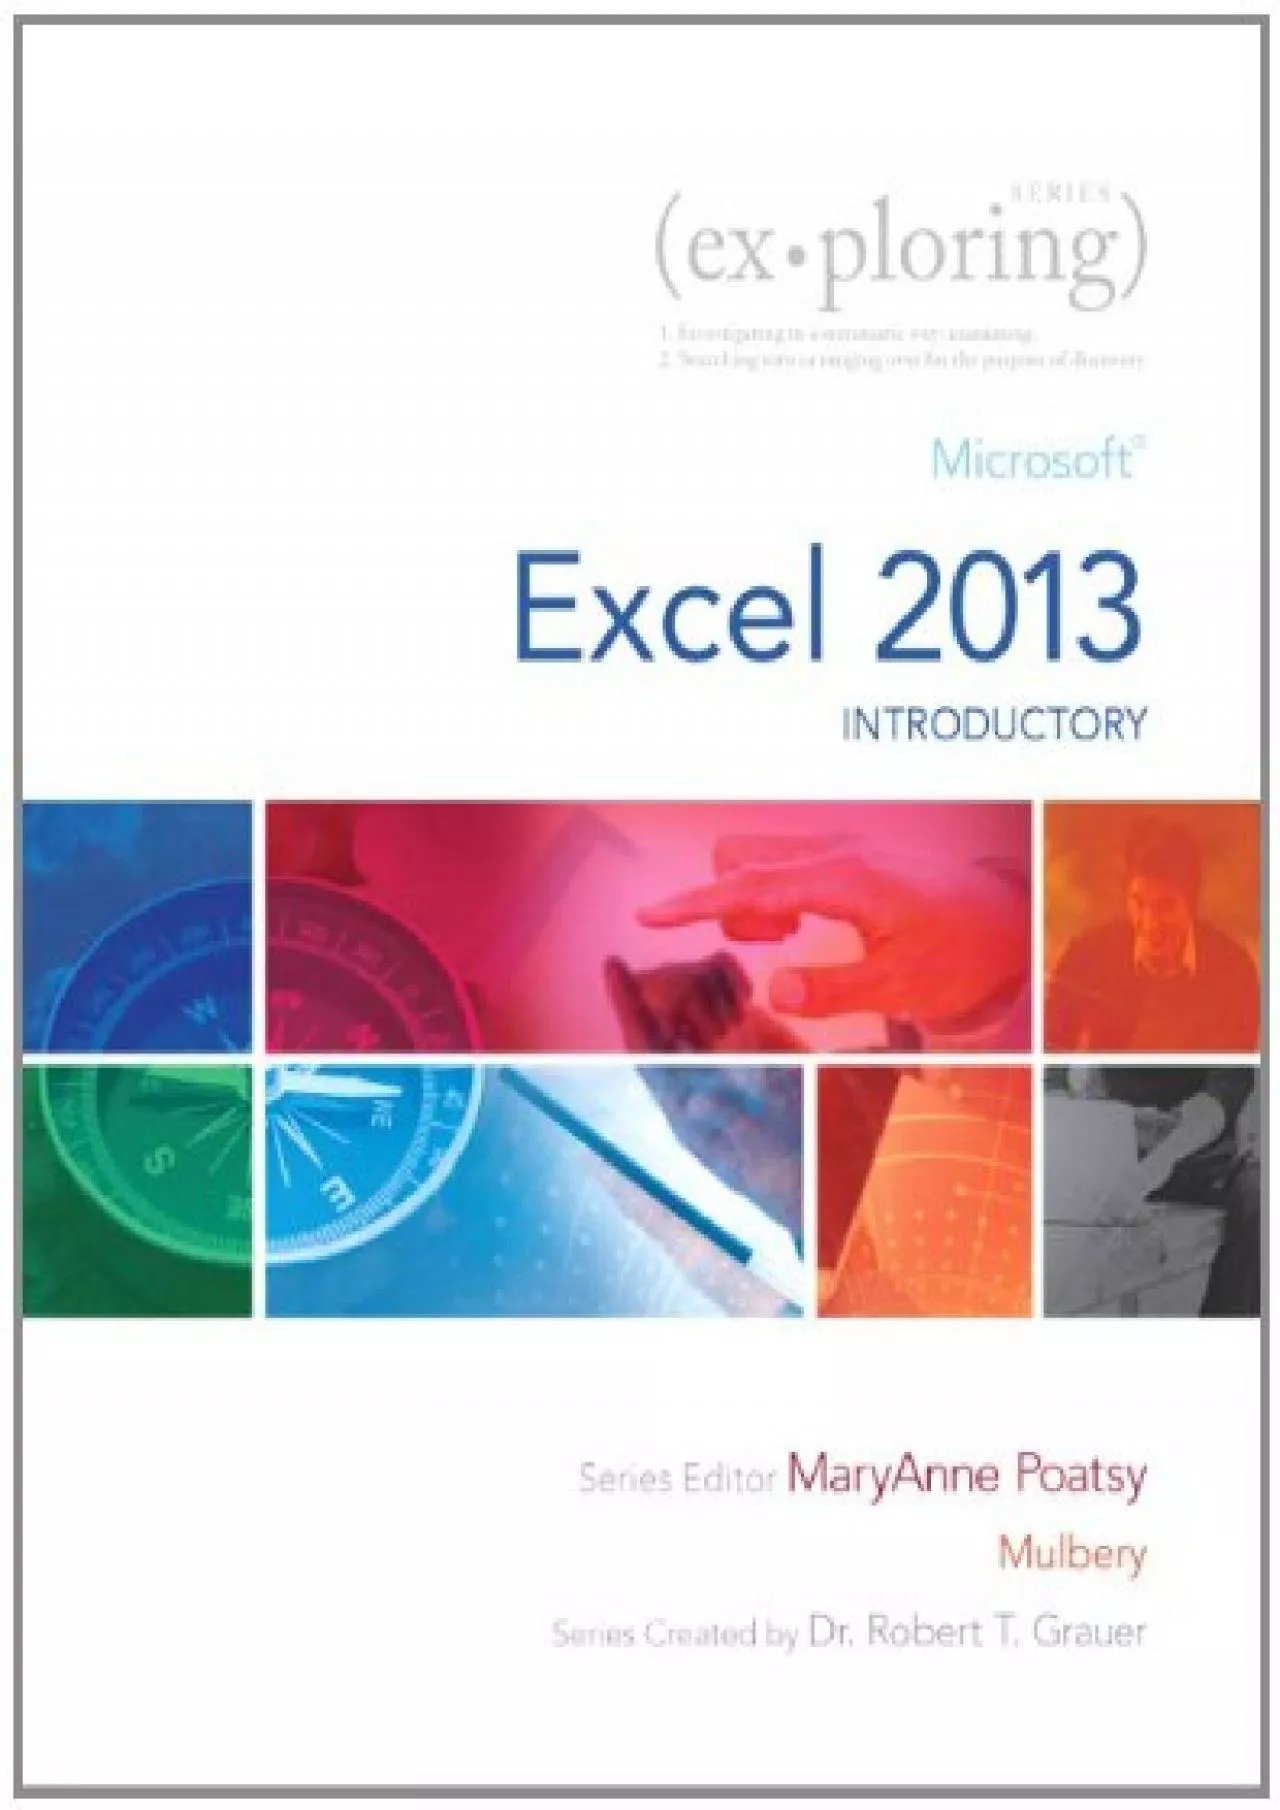 Exploring: Microsoft Excel 2013, Introductory (Exploring for Office 2013)